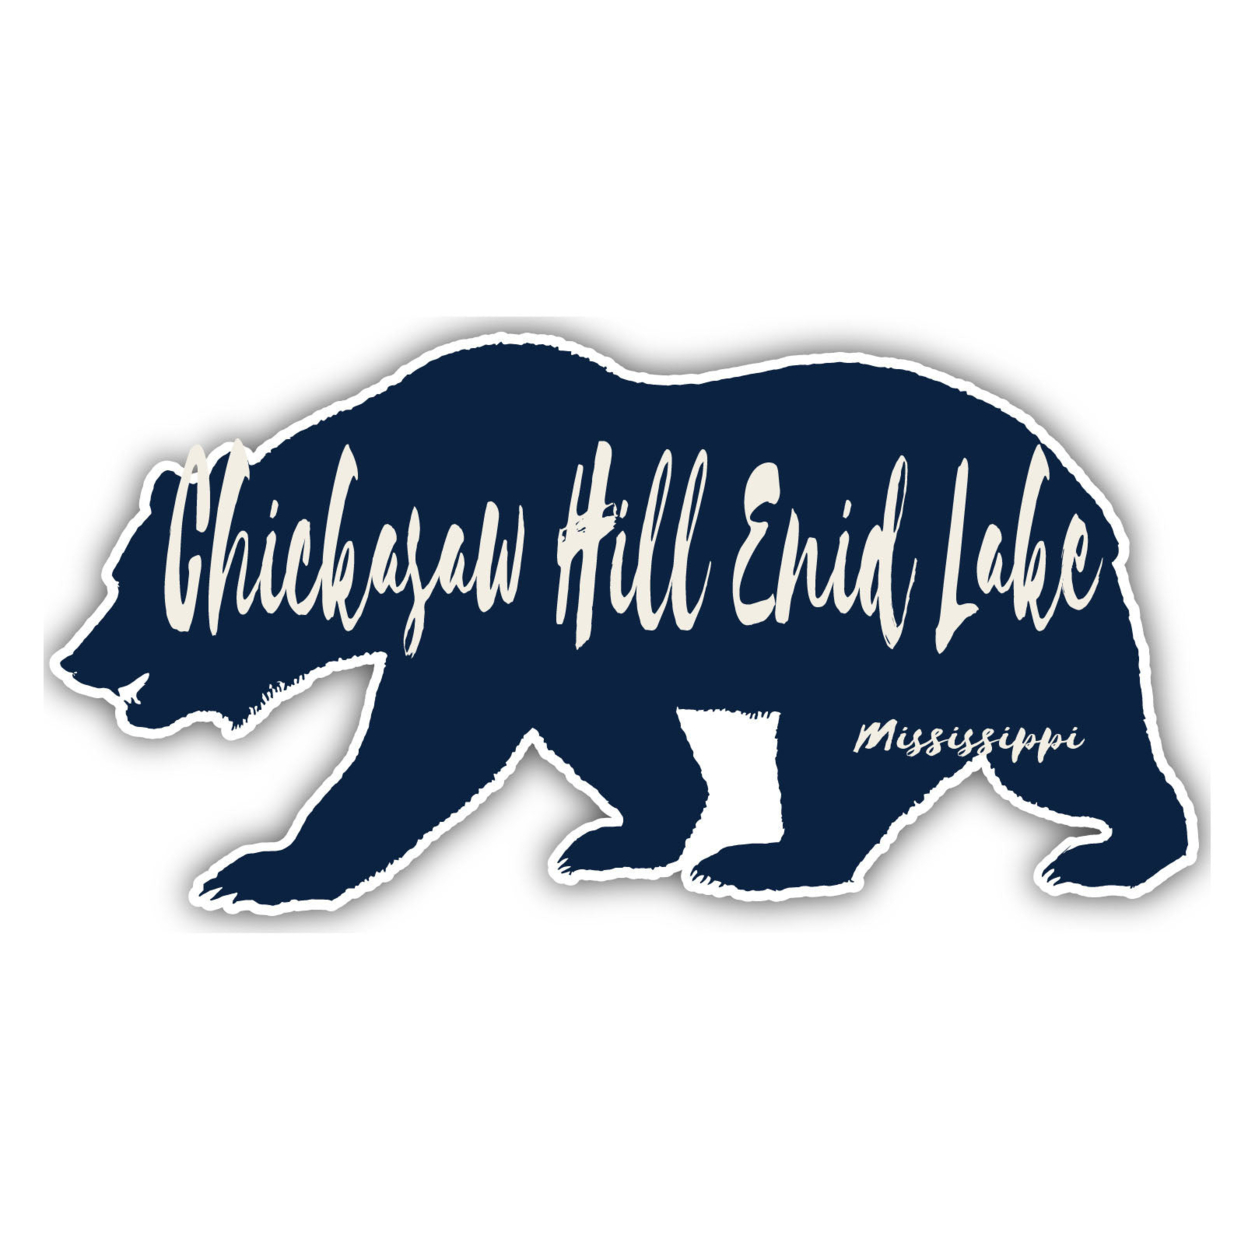 Chickasaw Hill Enid Lake Mississippi Souvenir Decorative Stickers (Choose Theme And Size) - 4-Pack, 6-Inch, Bear